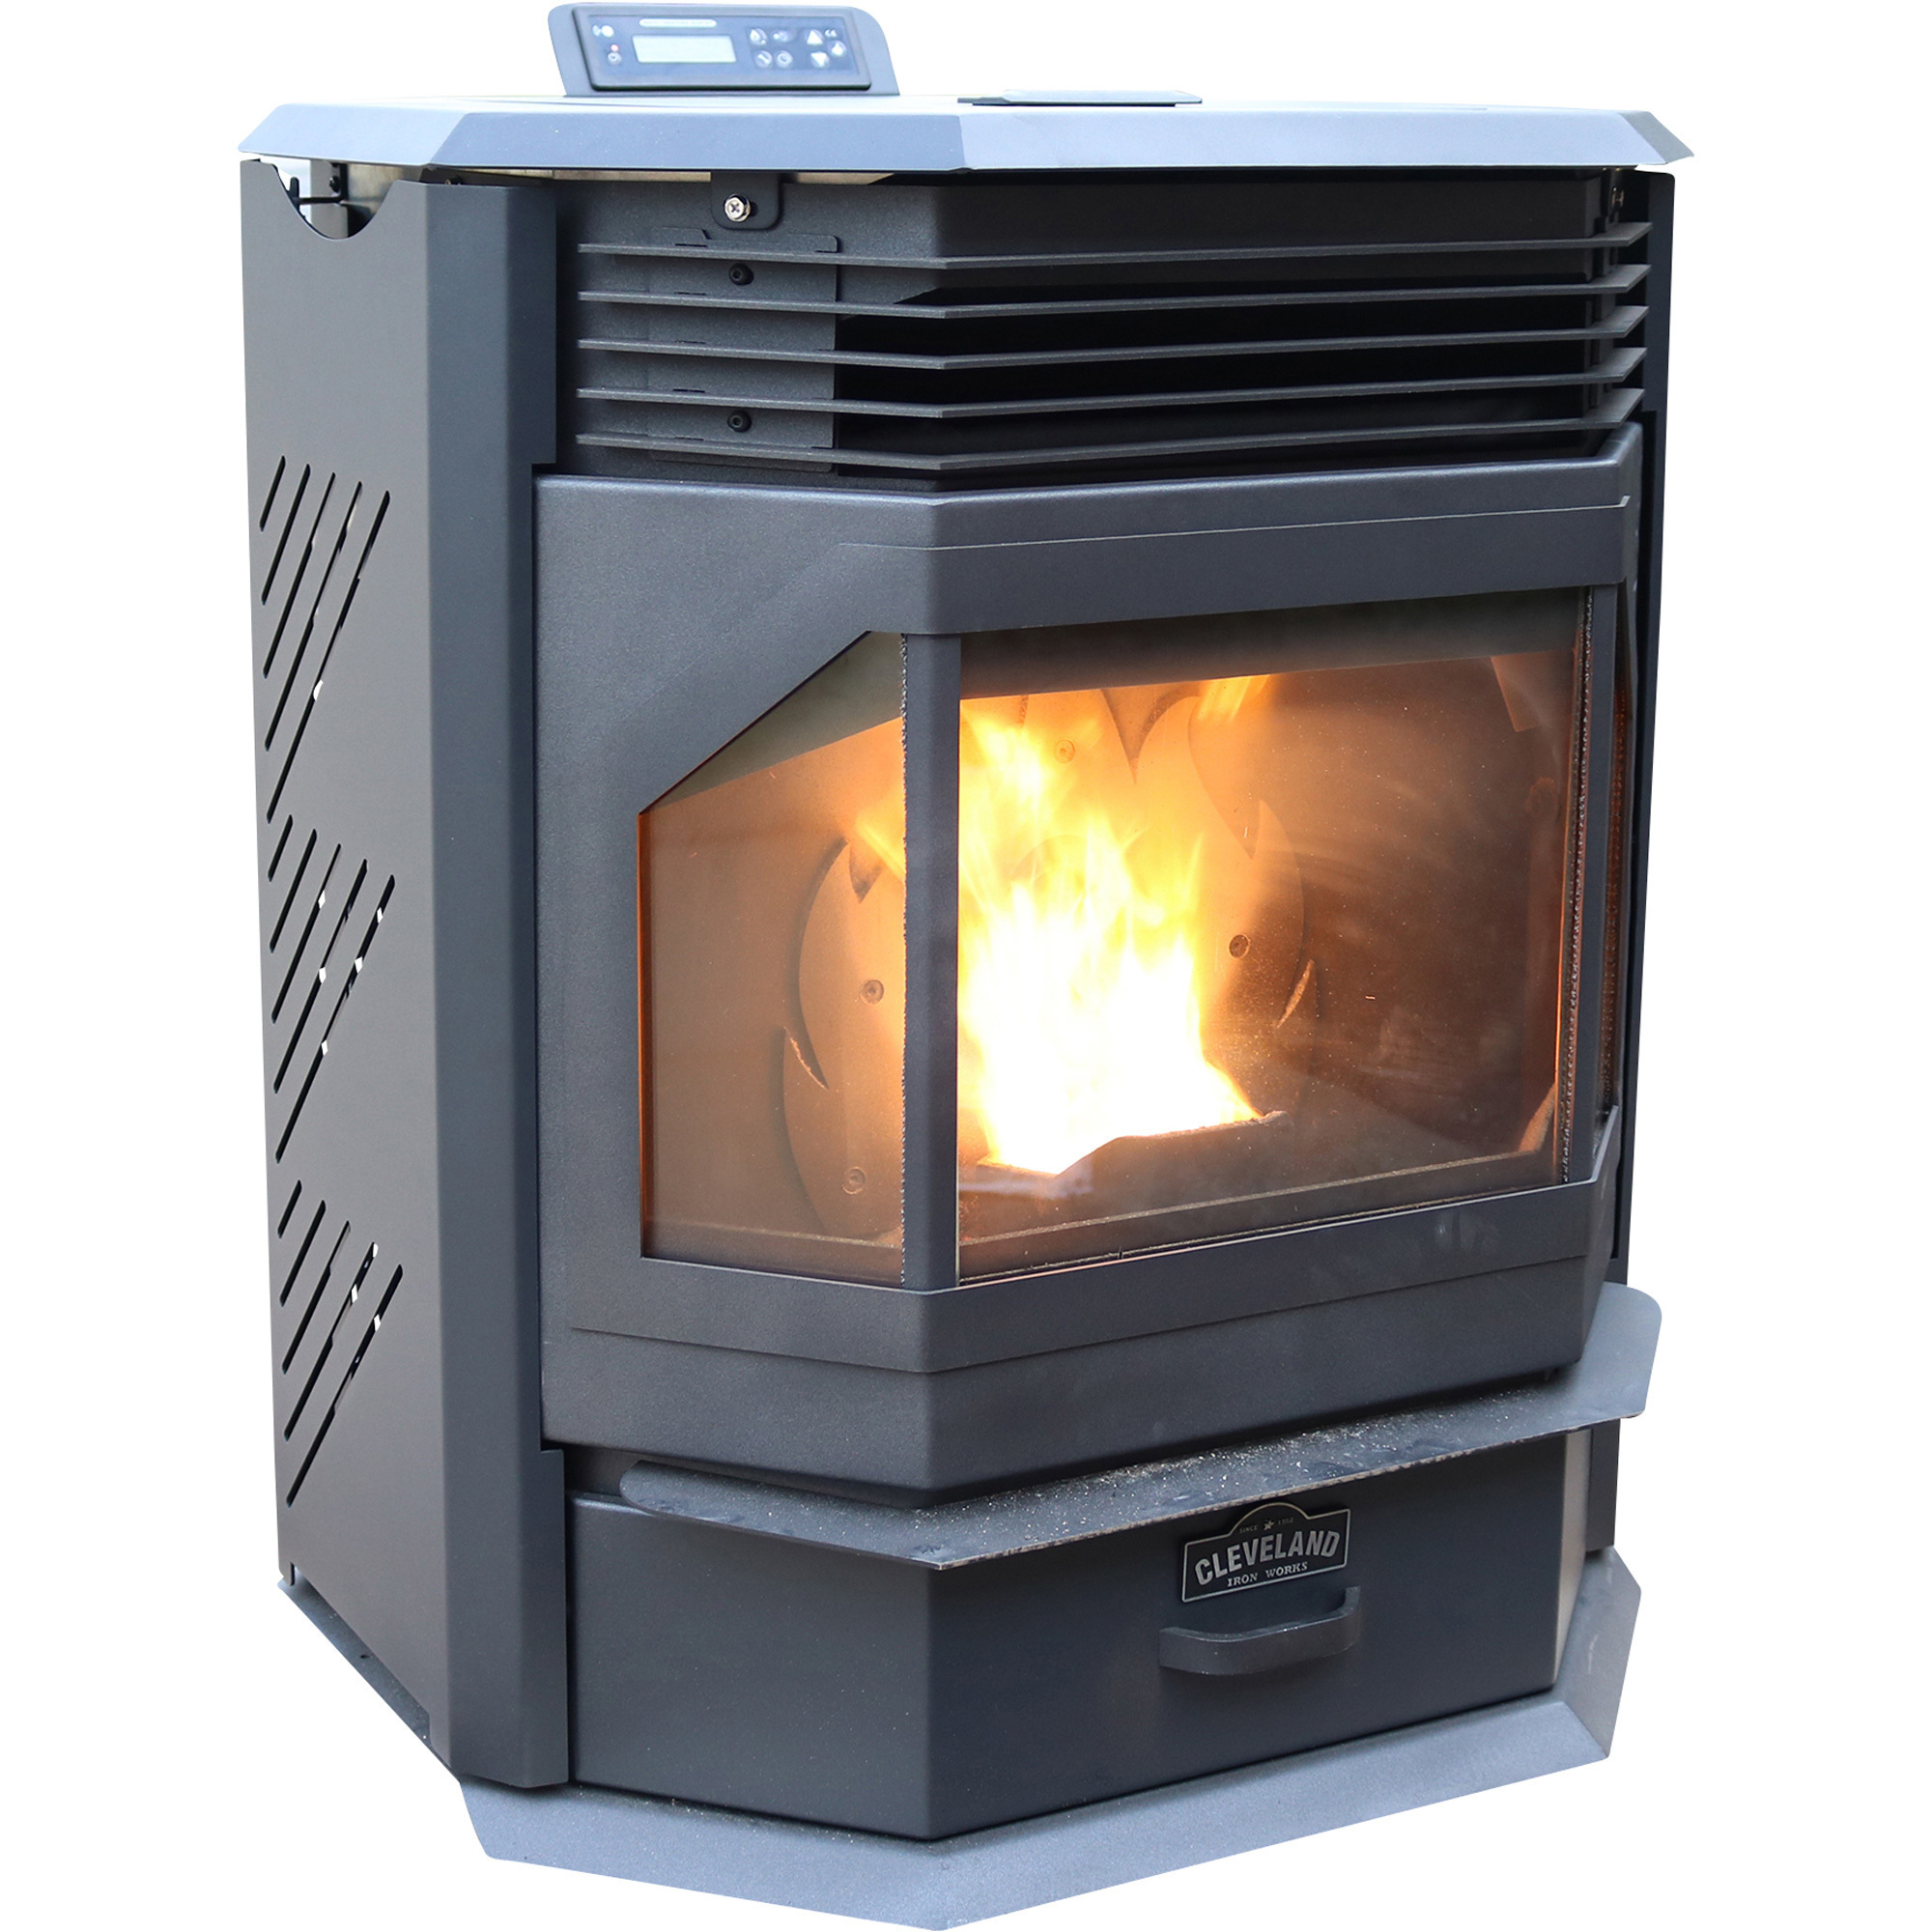 Cleveland Iron Works Bay Front Pellet Stove with Smart Home Technology, 49,259 BTU, EPA Certified, Model PSBF66W-CIW